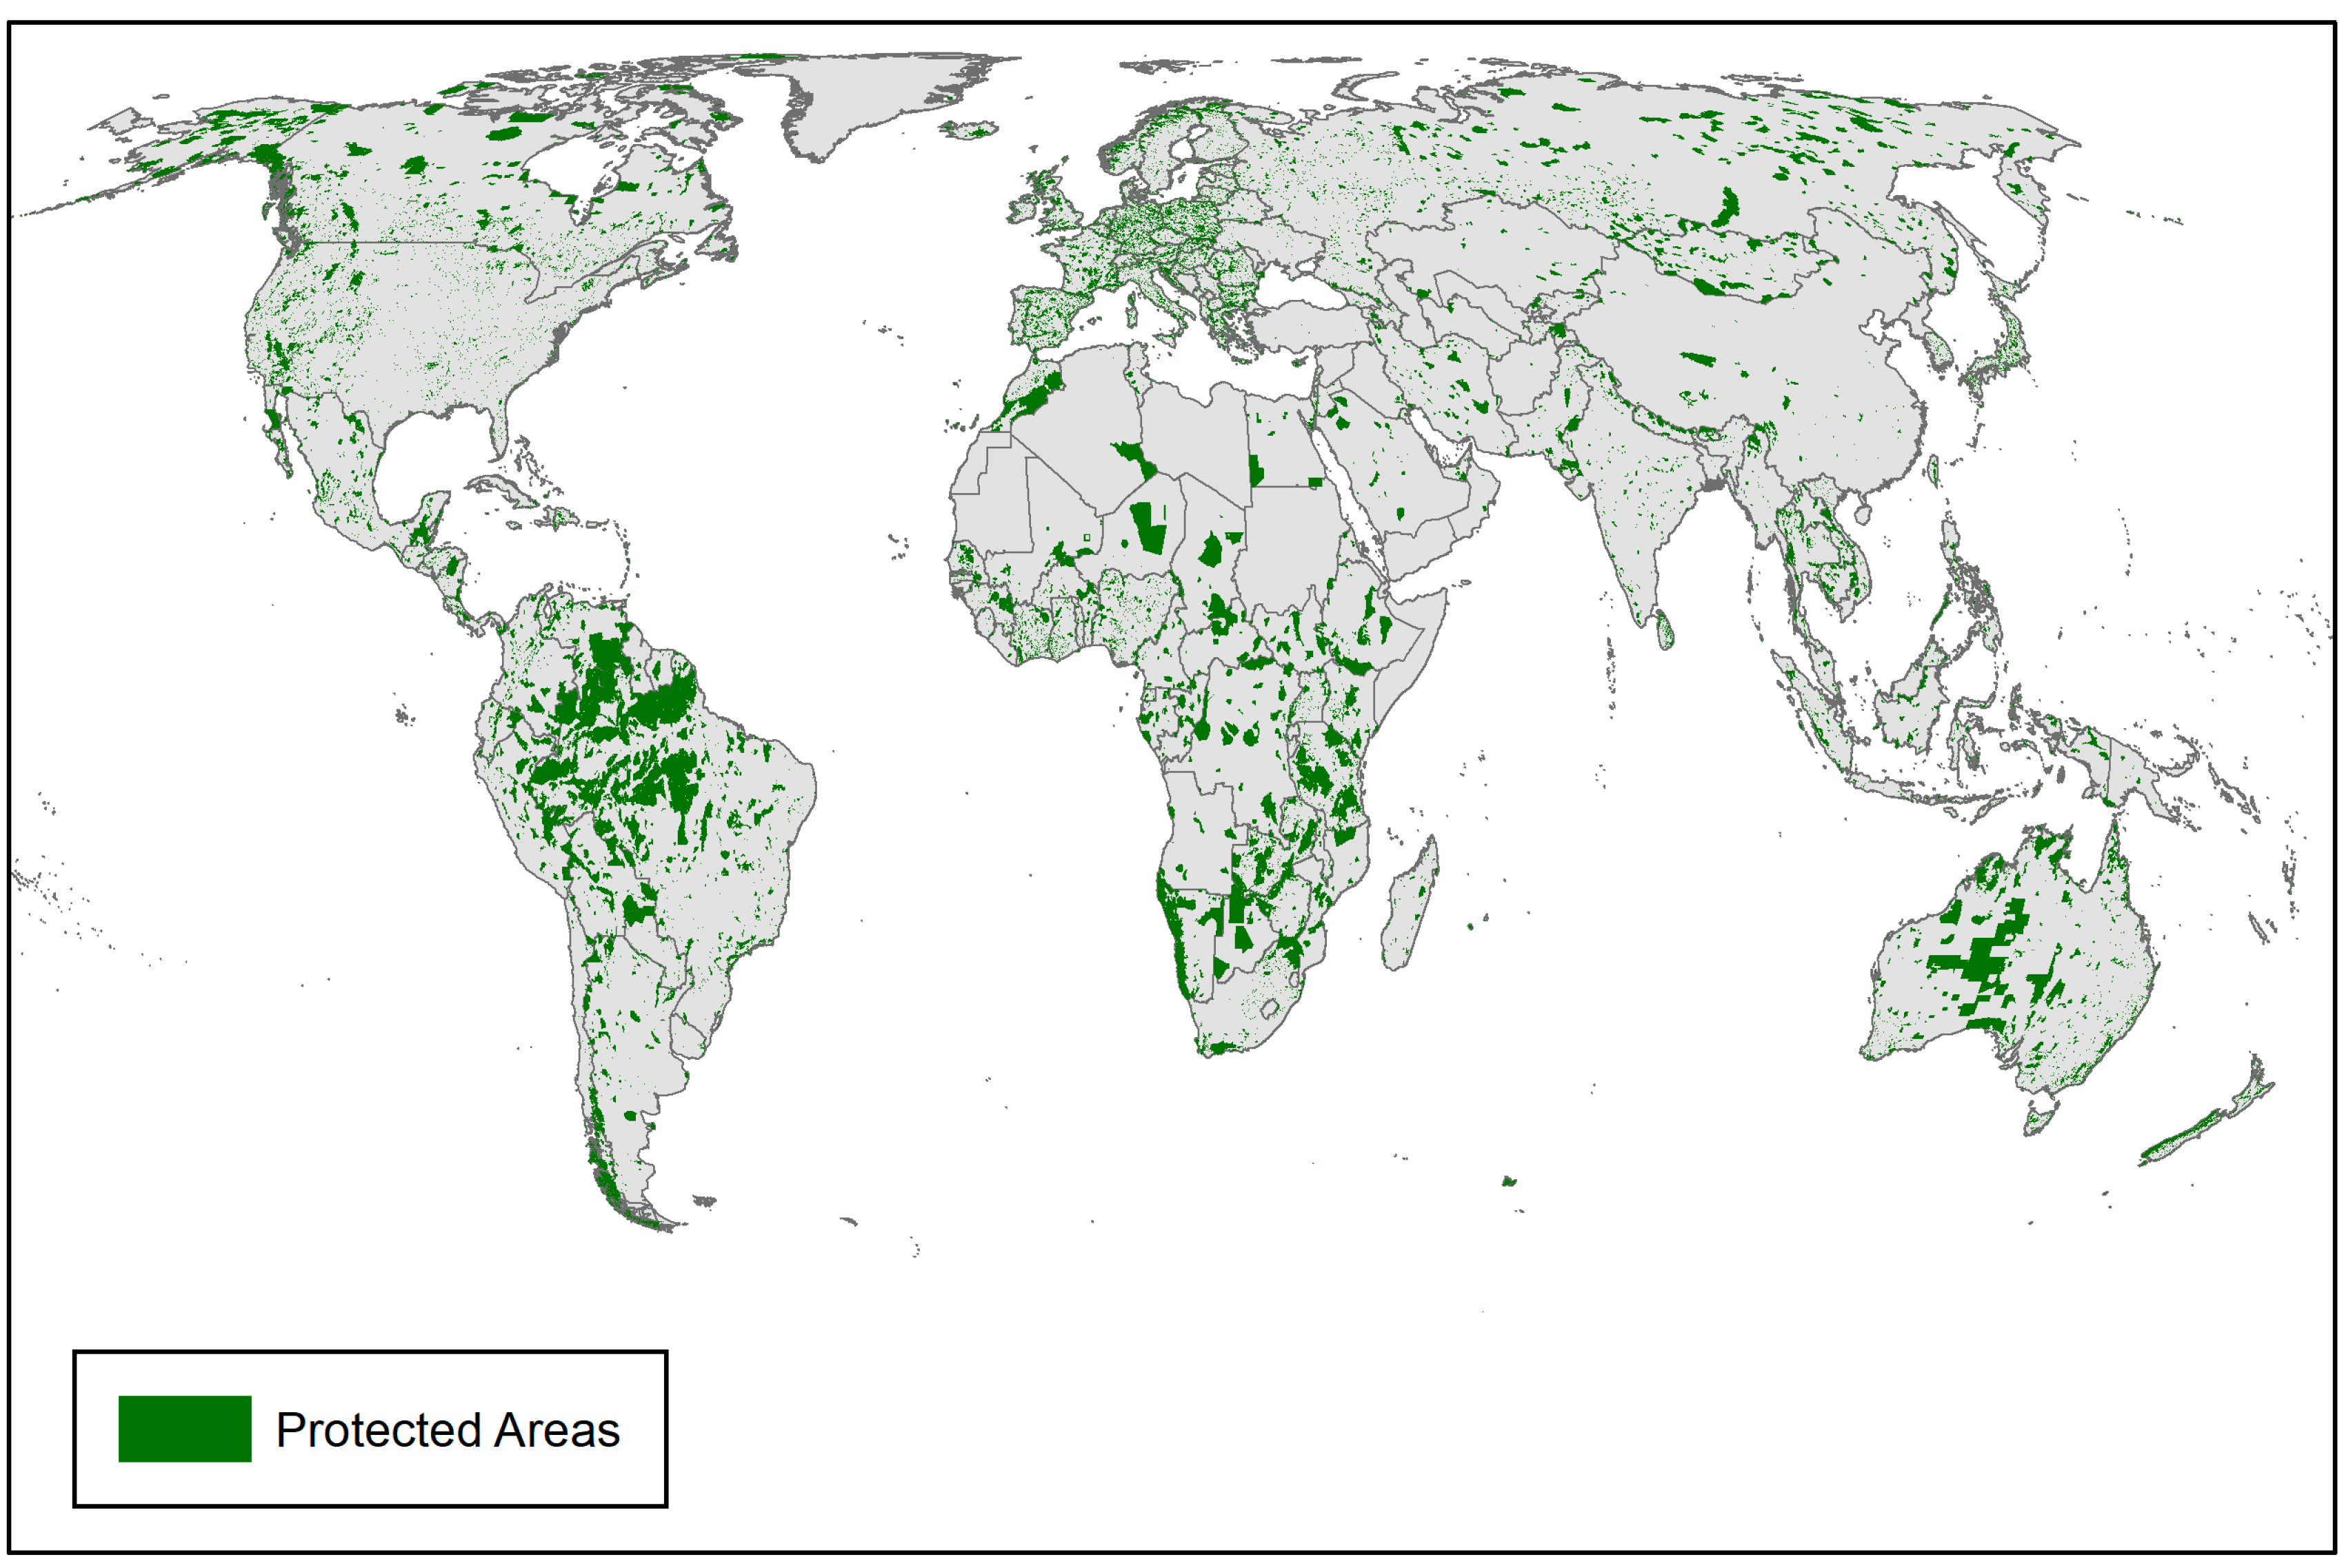 Protected areas cover 44% of the Brazilian